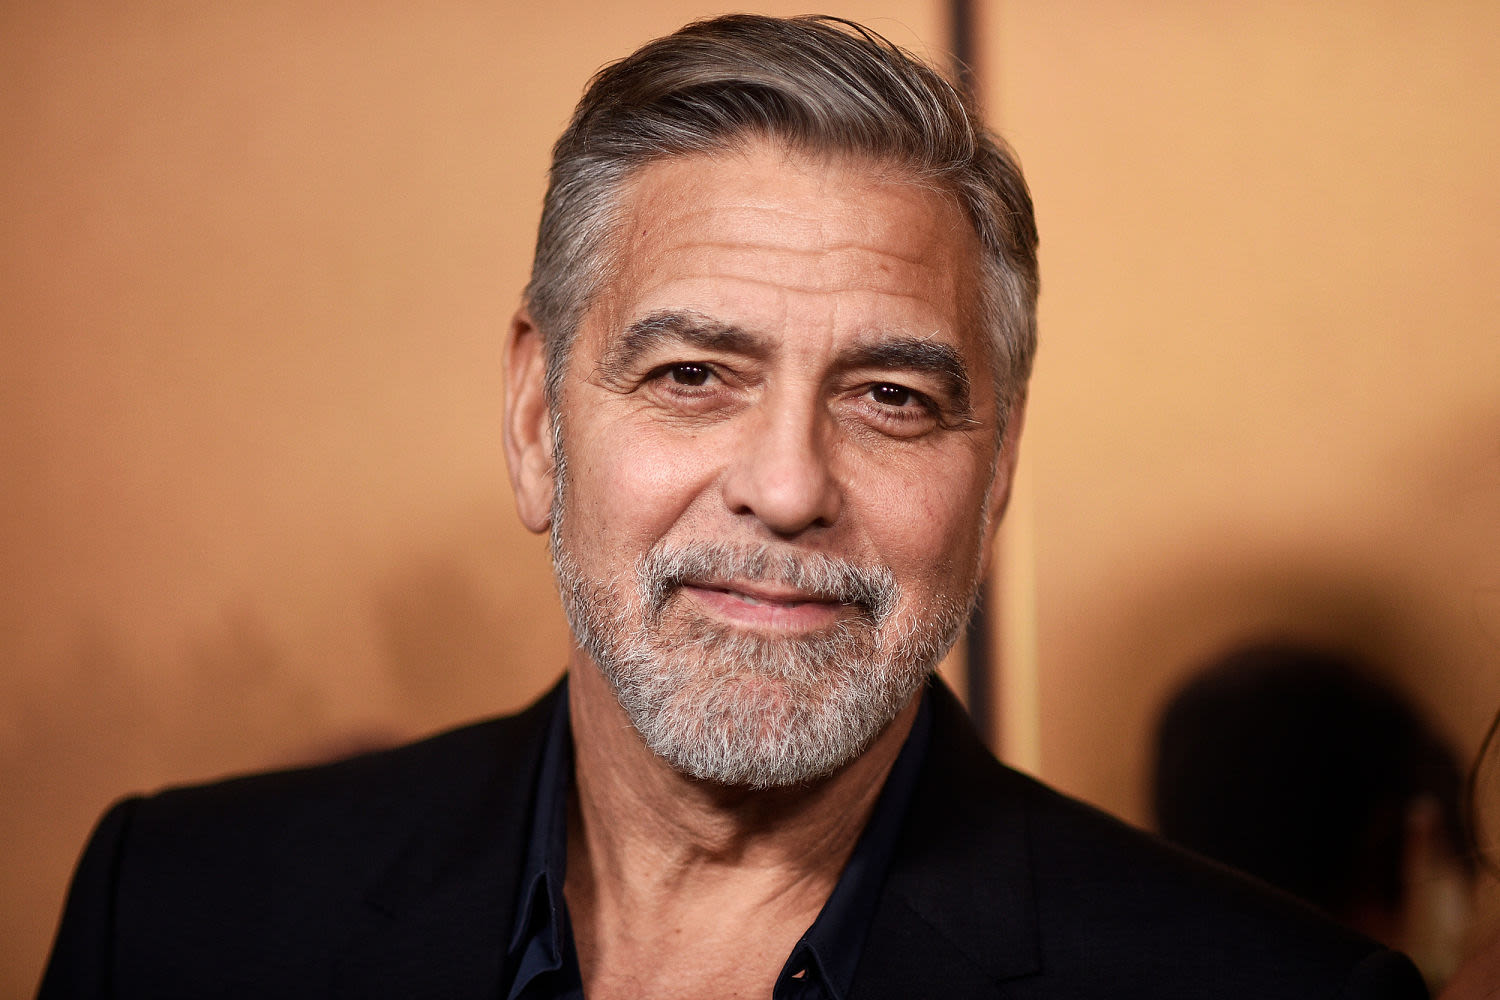 George Clooney to make Broadway debut as newsman Edward R. Murrow in 'Good Night, and Good Luck'